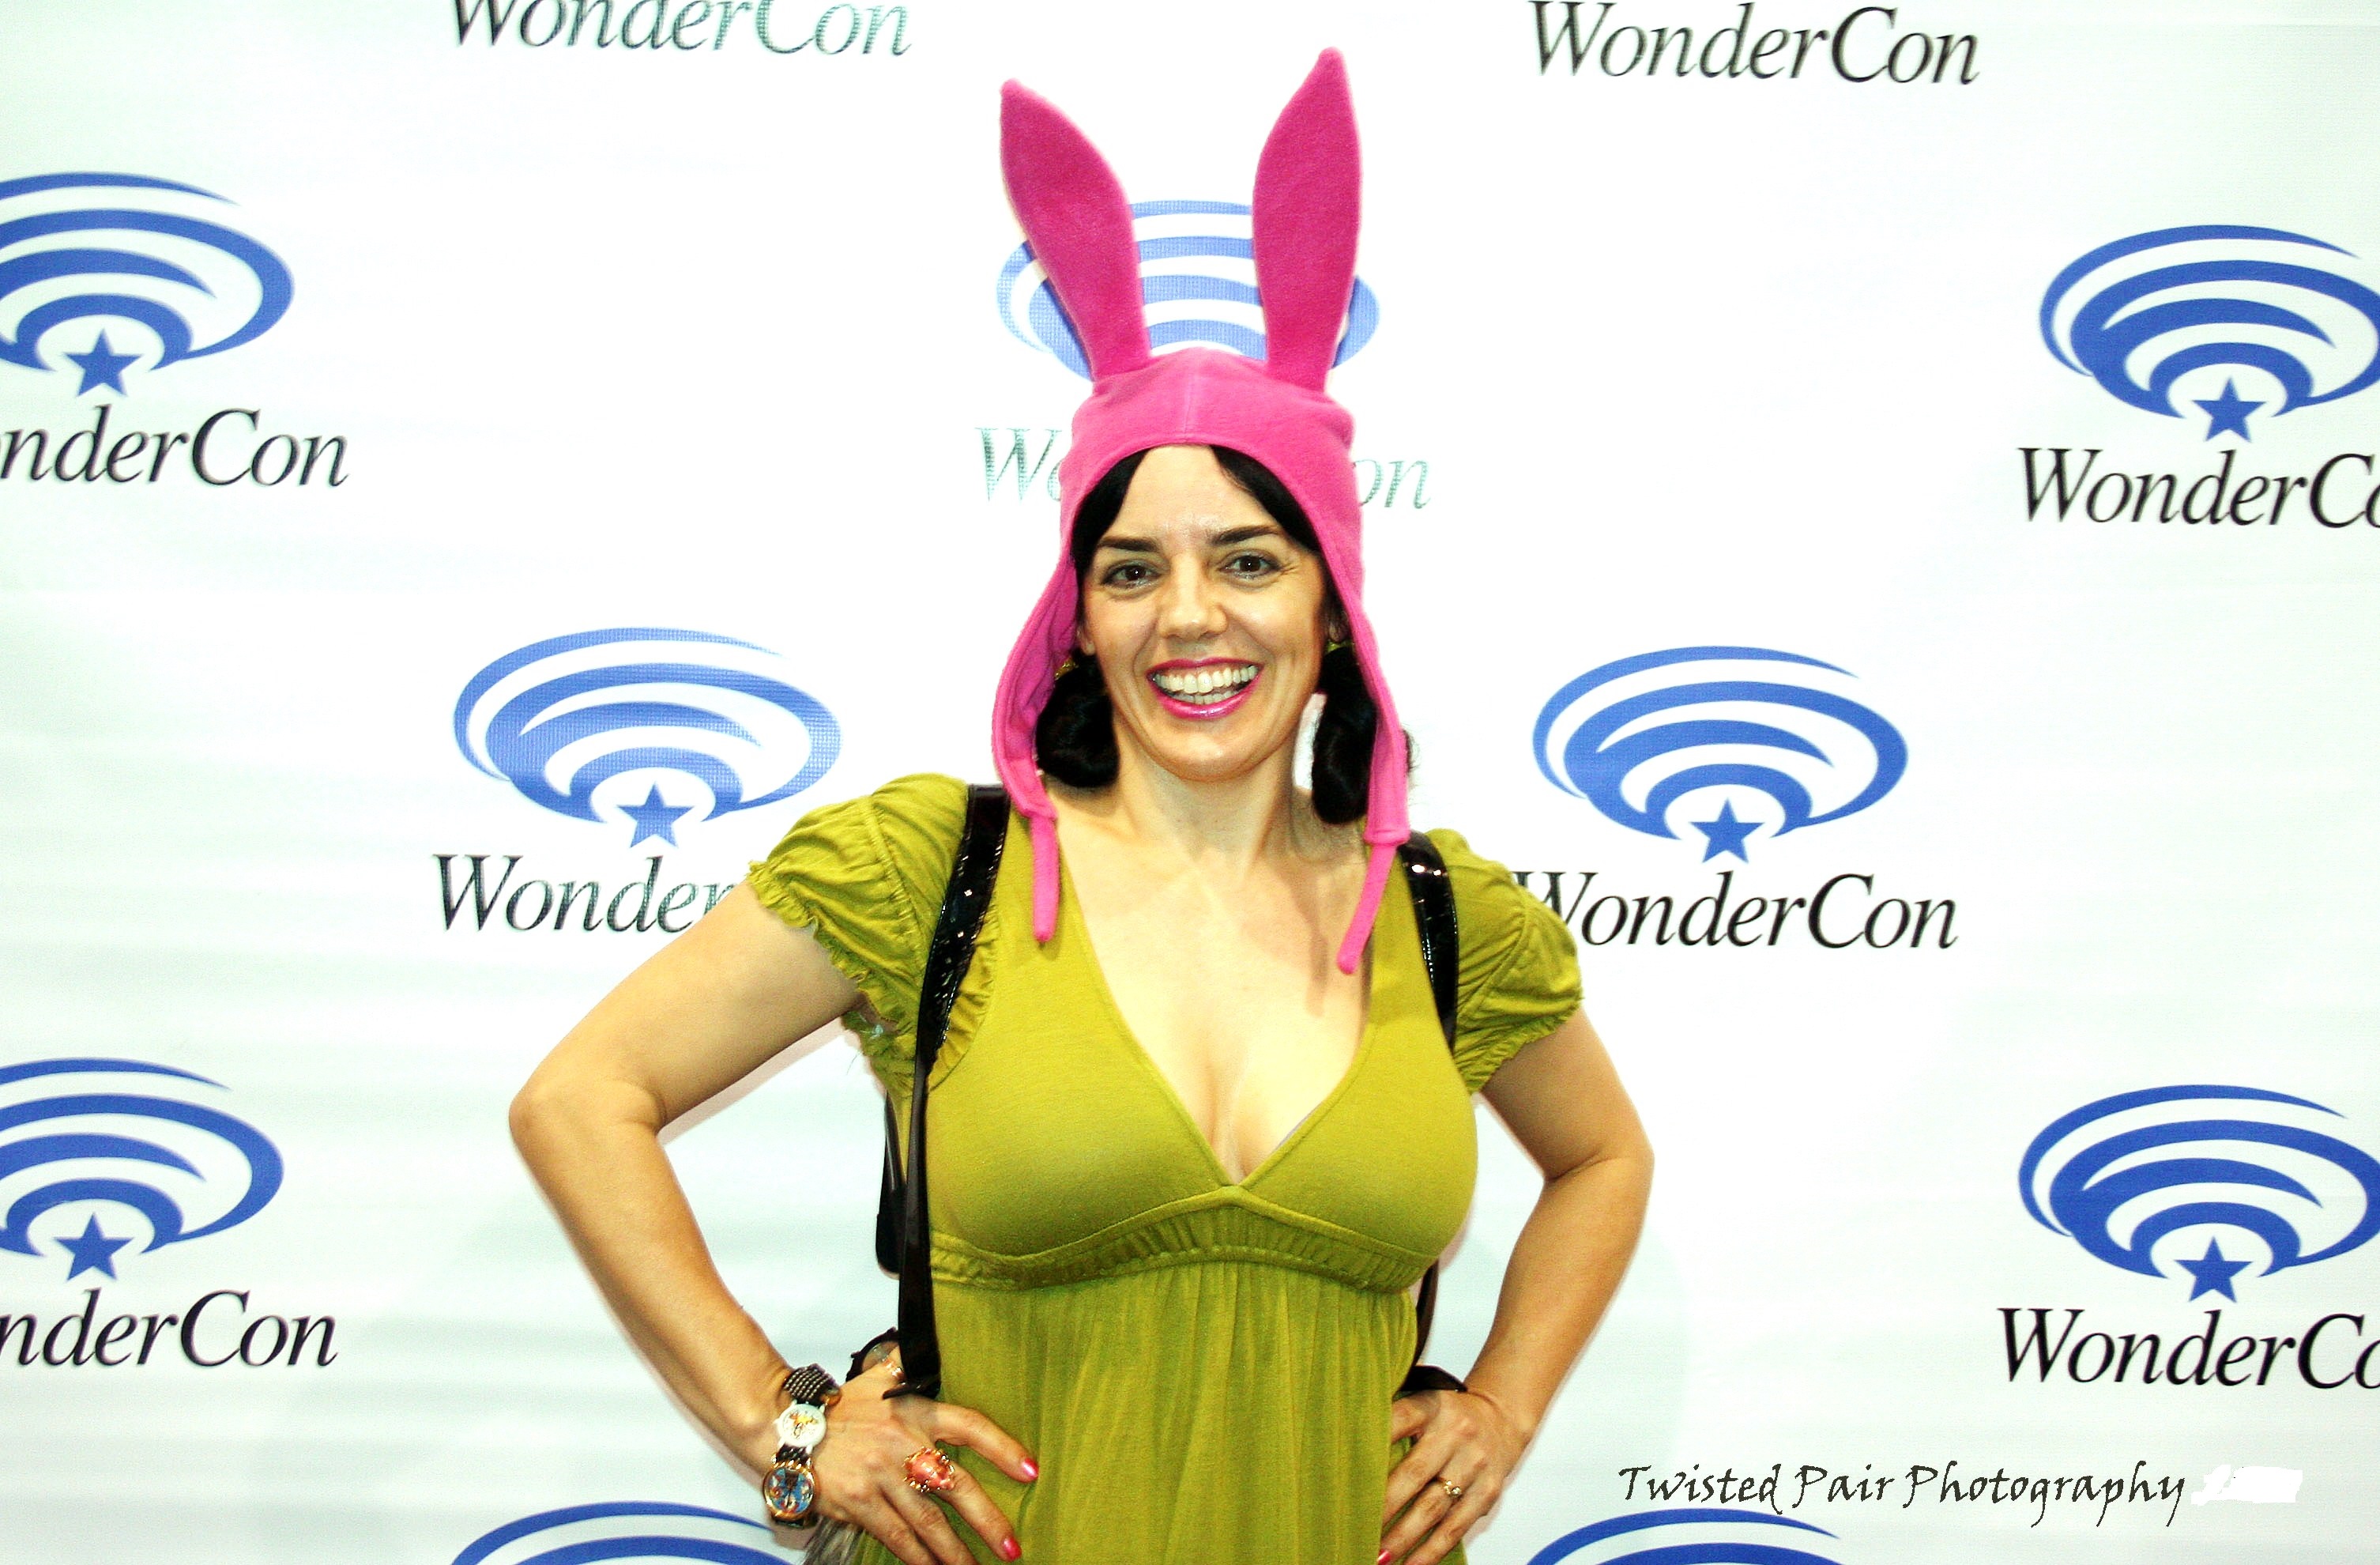 JennyPop: “Perky on the Page, Awkward in Person” (a.k.a. “Savannah of Williamsburg” and “The Darlings of Orange County” authoress Jennifer Susannah Devore). Photo: Twisted Pair Photography, WonderCon Anaheim 